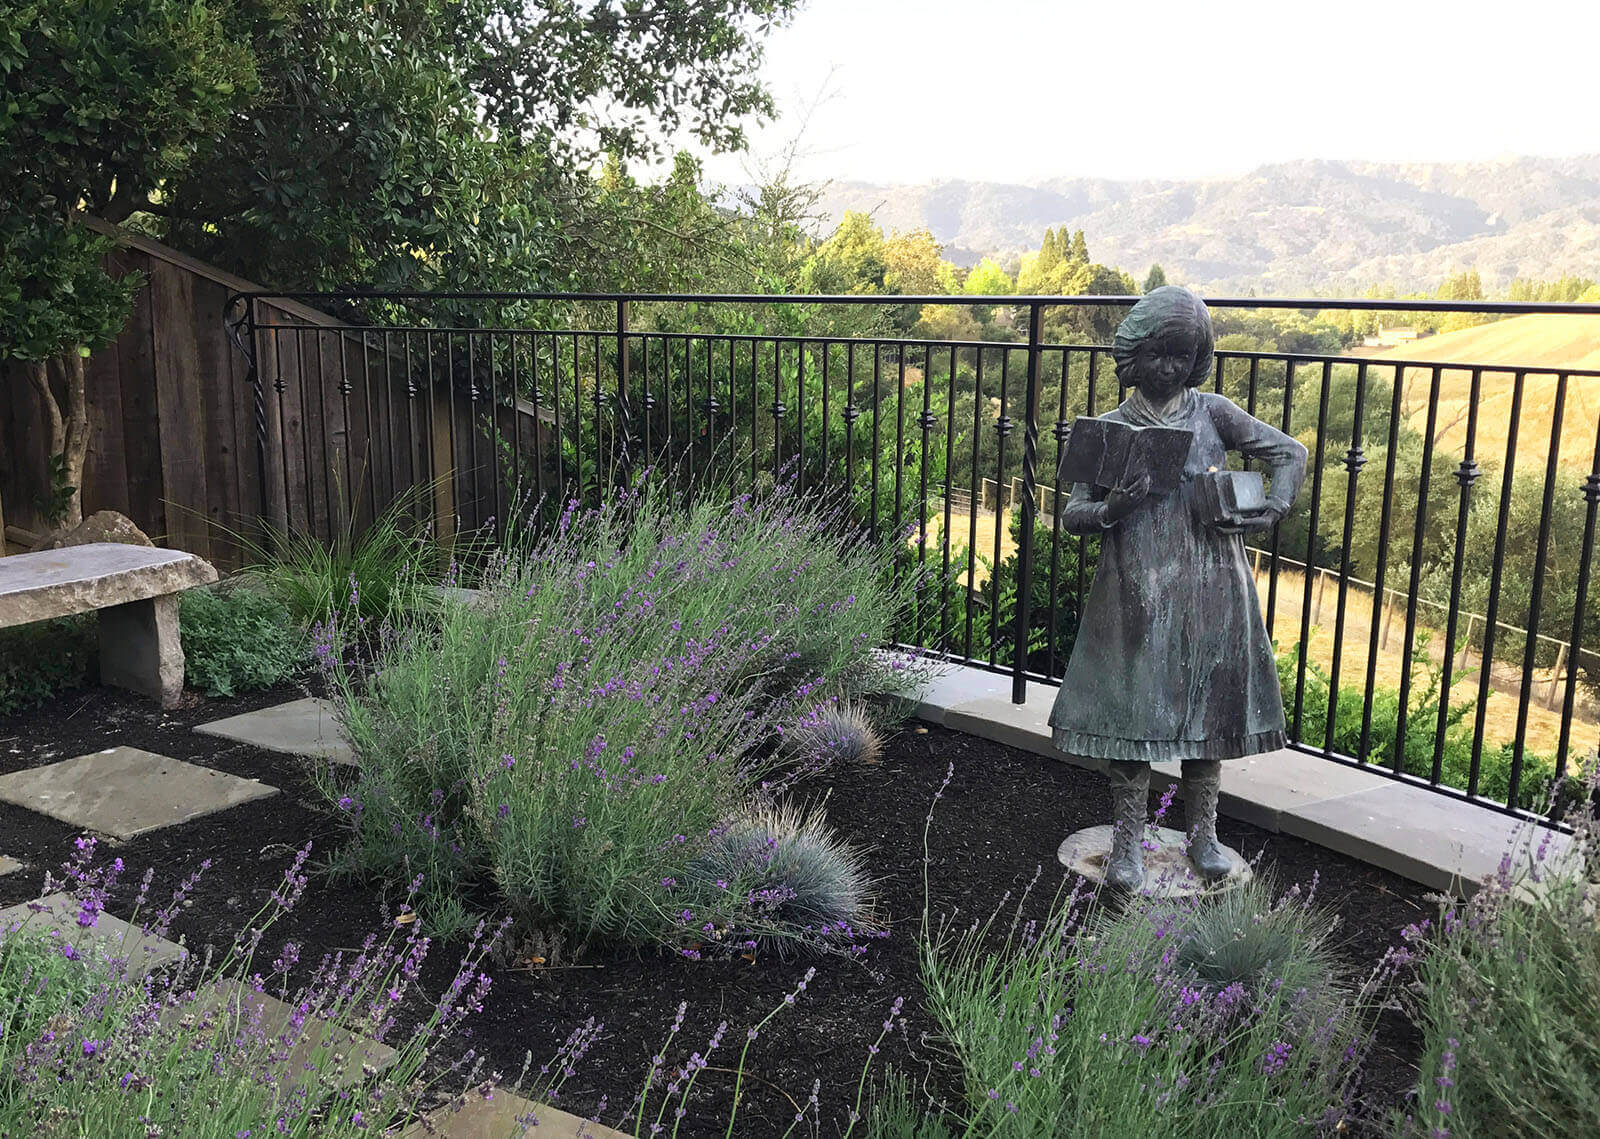 Garden with statue of little girl reading books, in front of lovely valley view